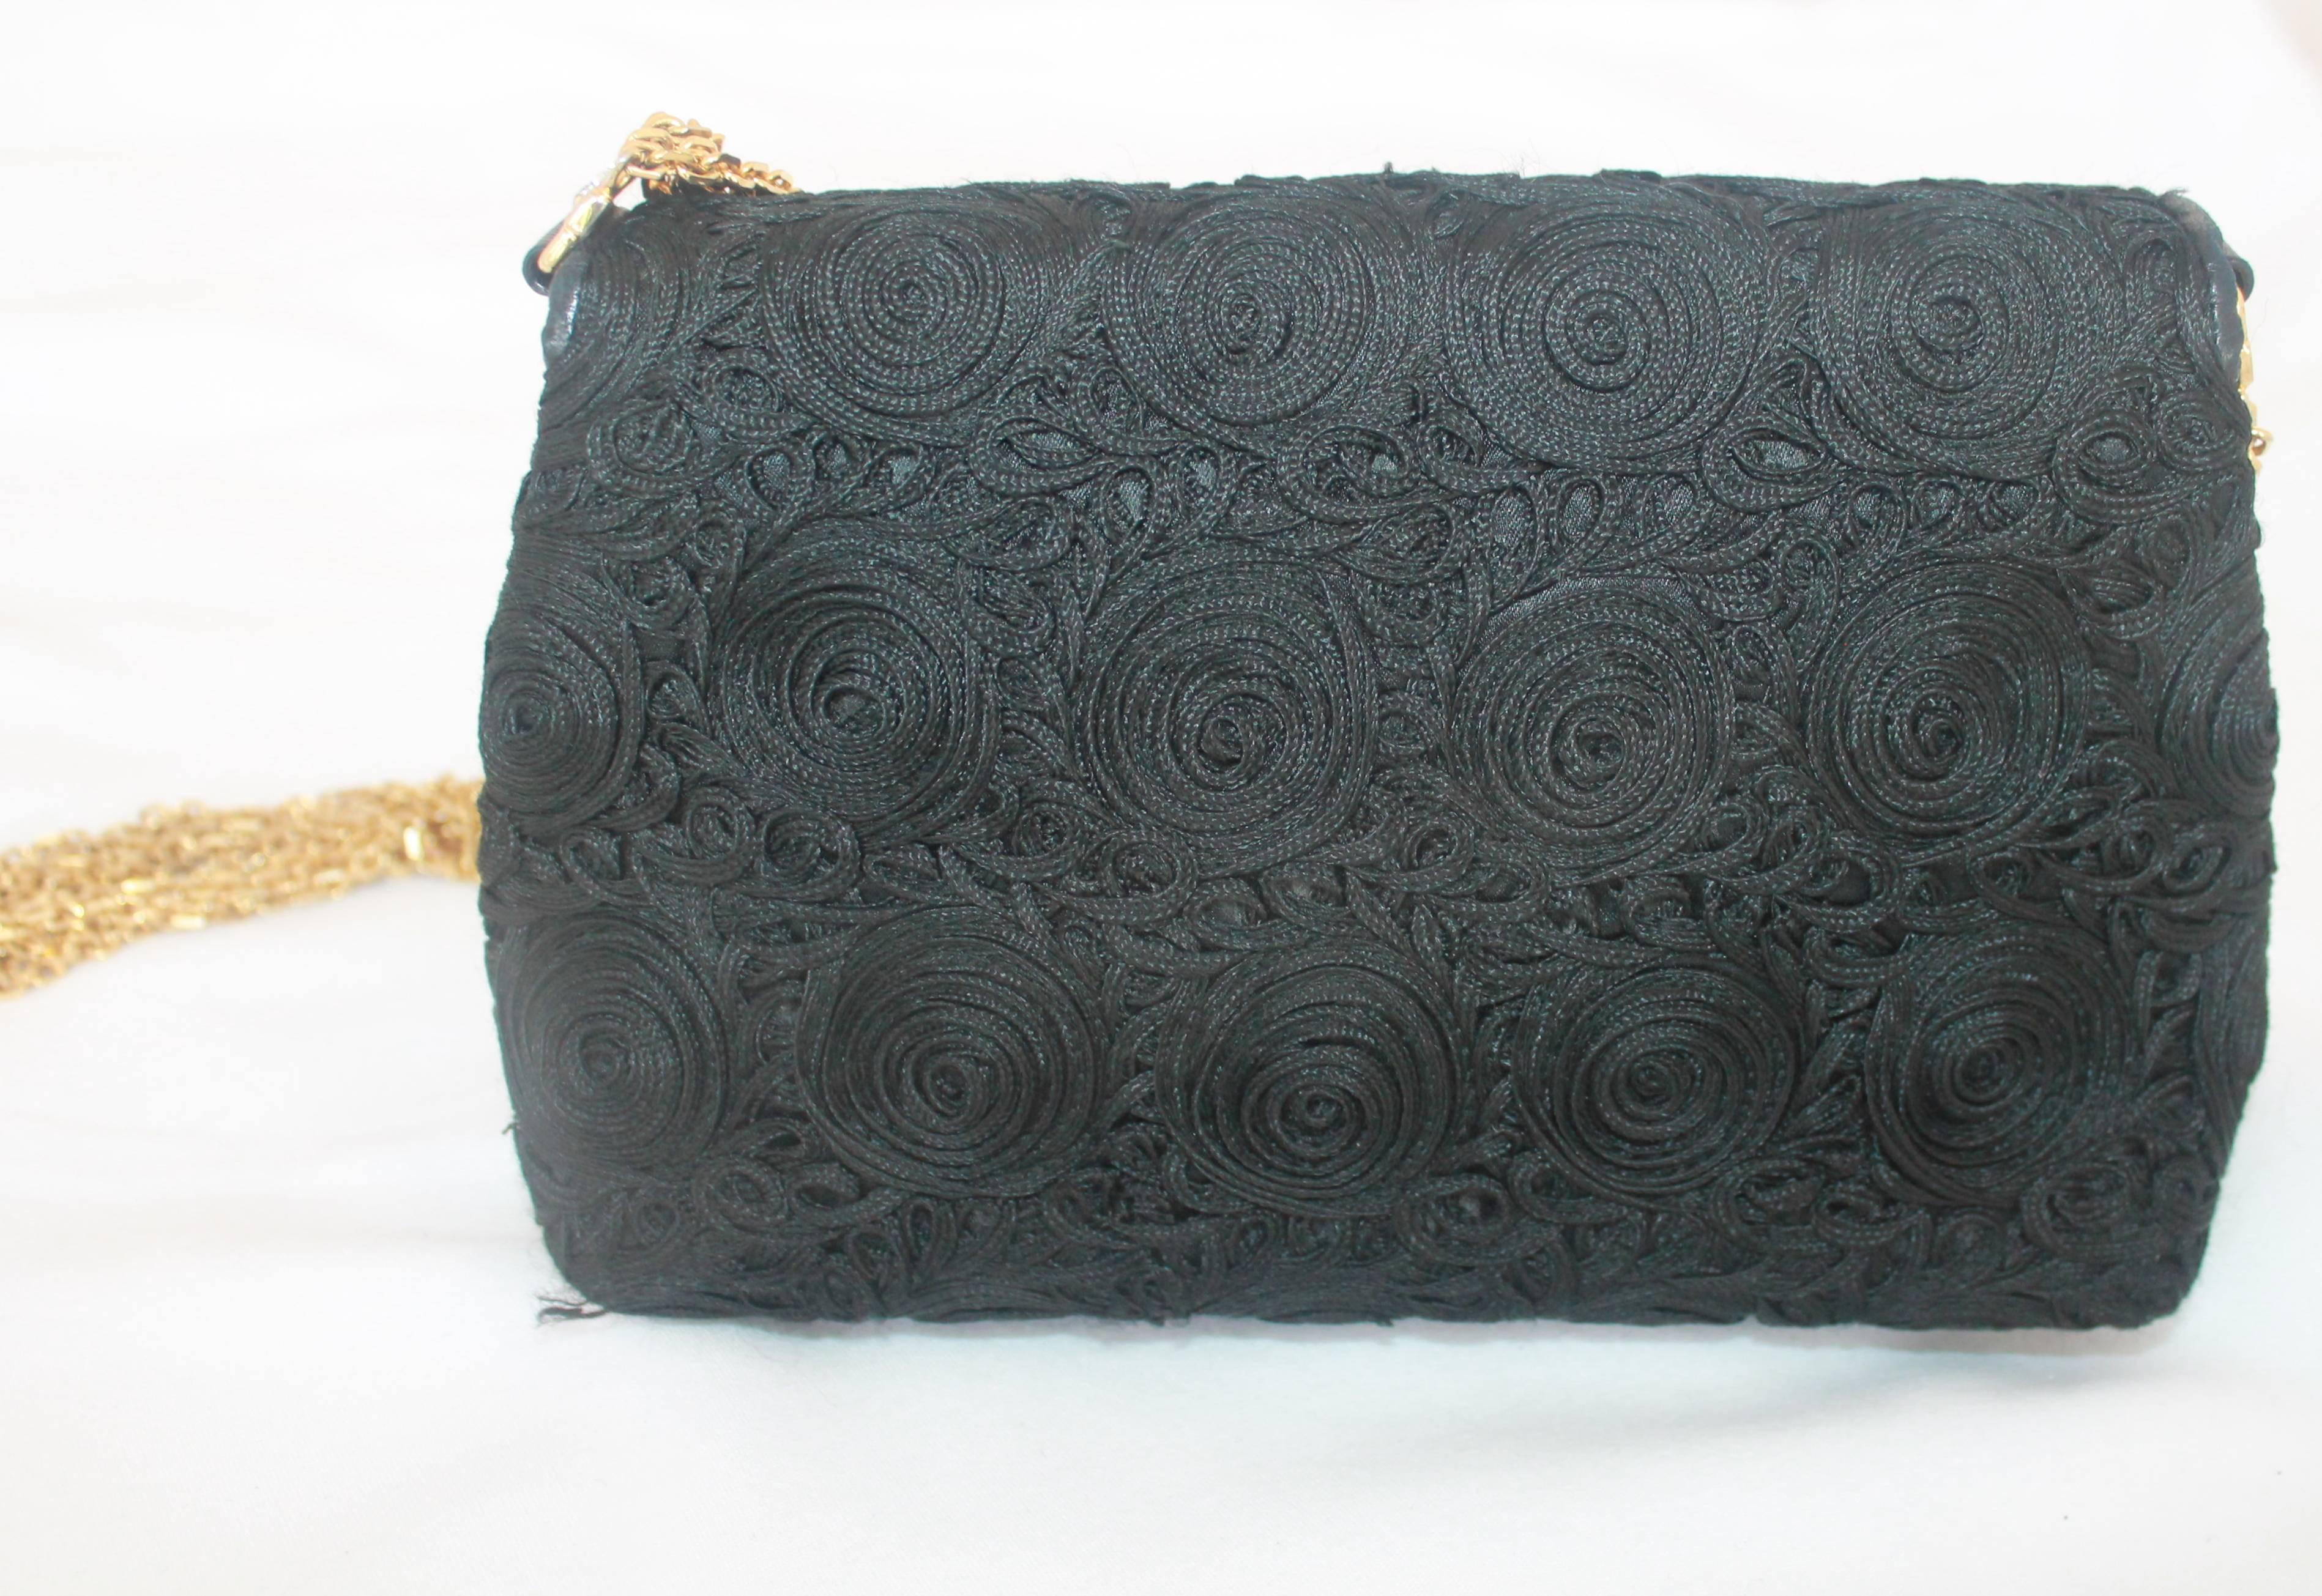 Chanel Black Lace Soutache and Leather Evening Bag - Circa Late 1980's 1